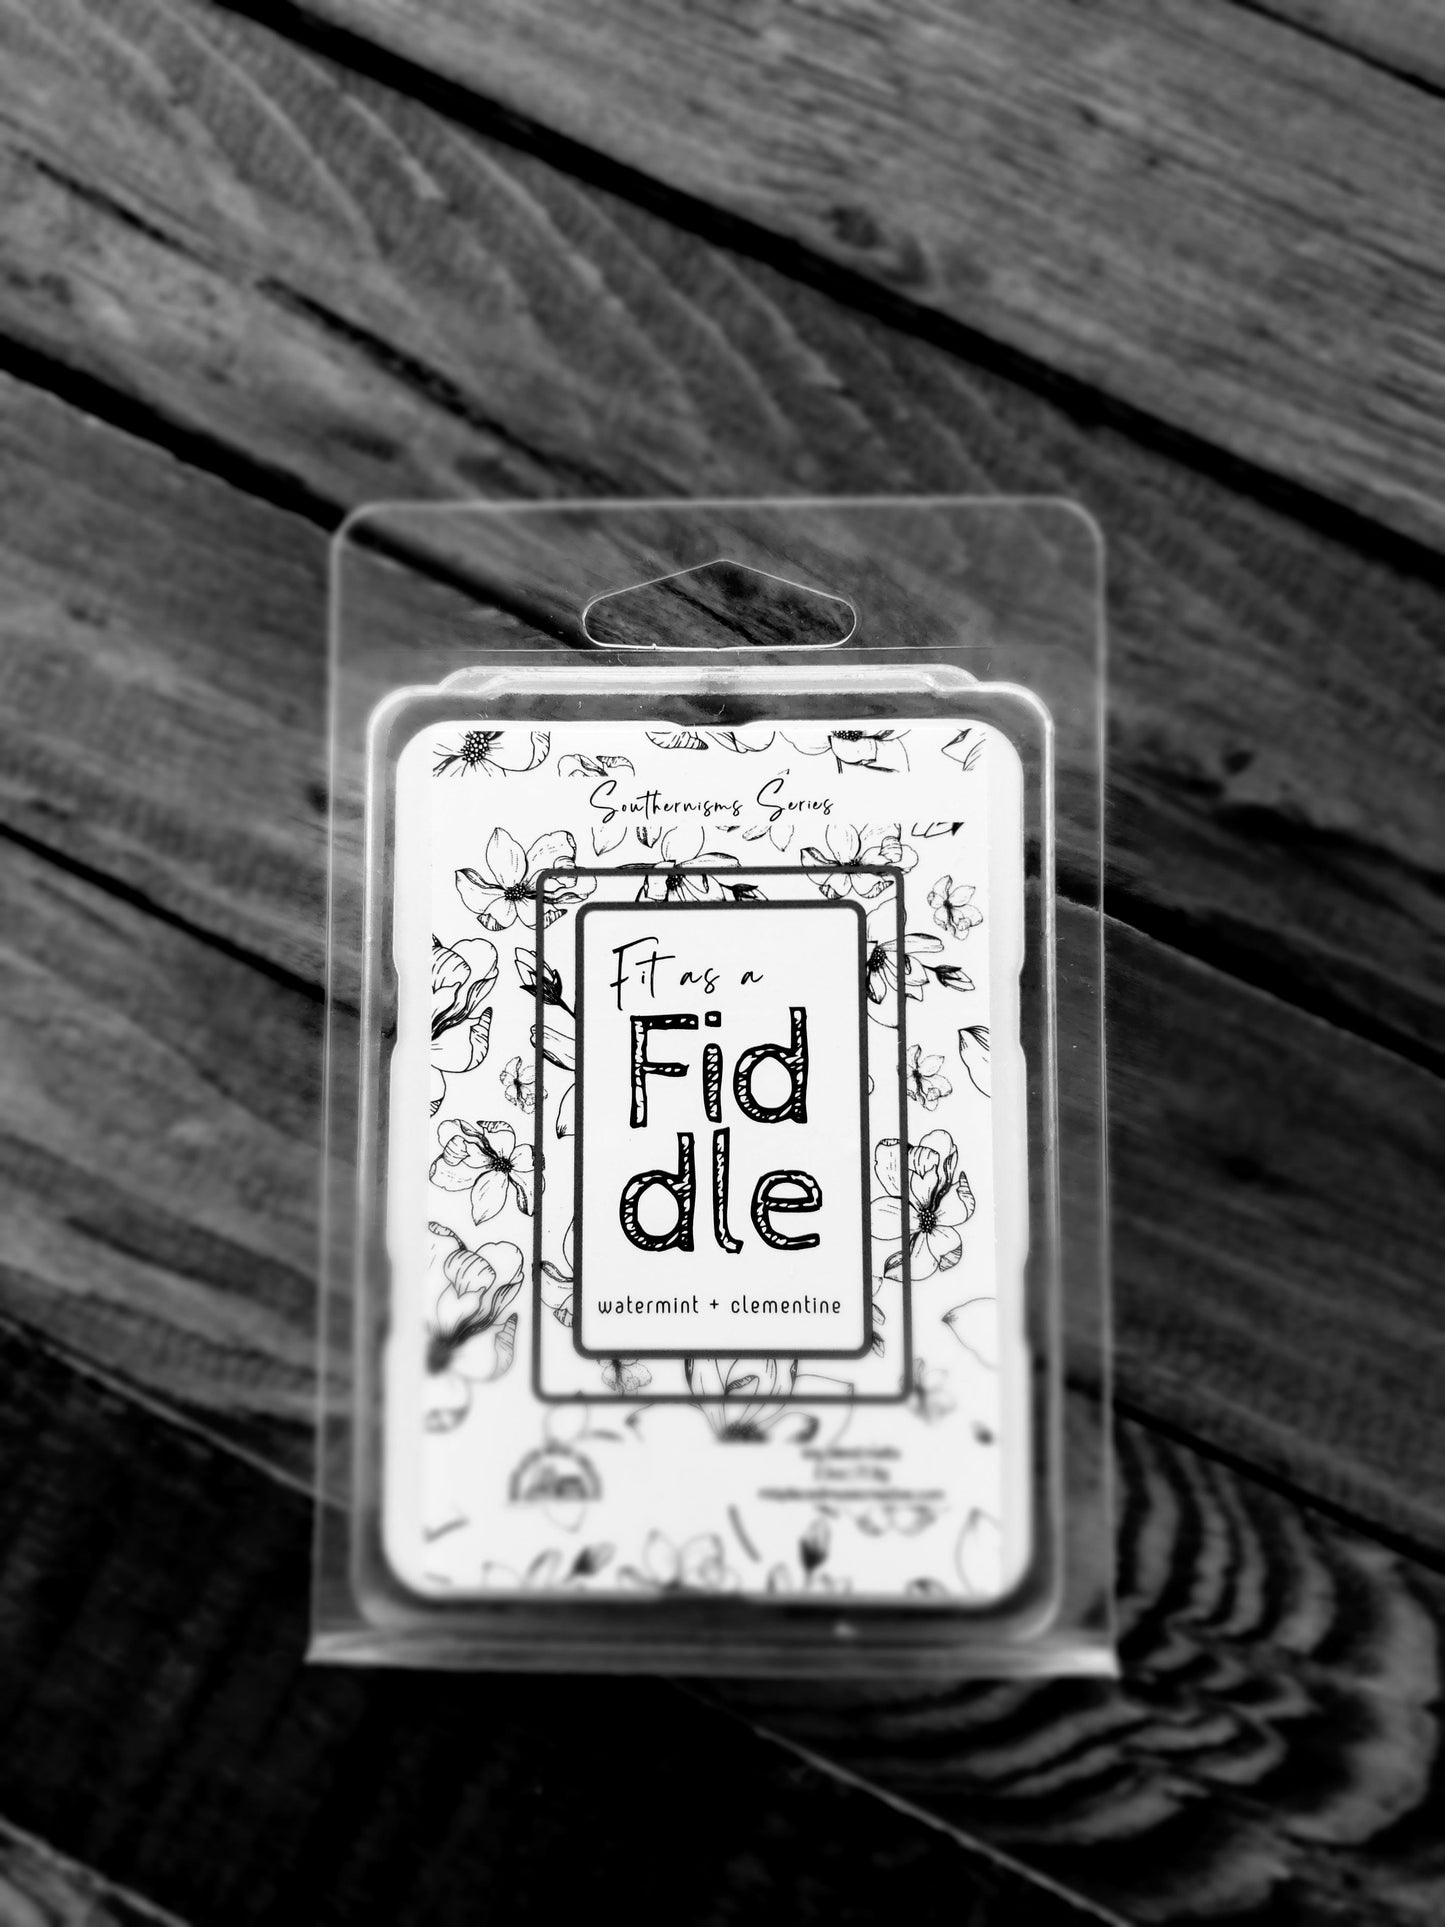 Fit as a Fiddle Wax Melts